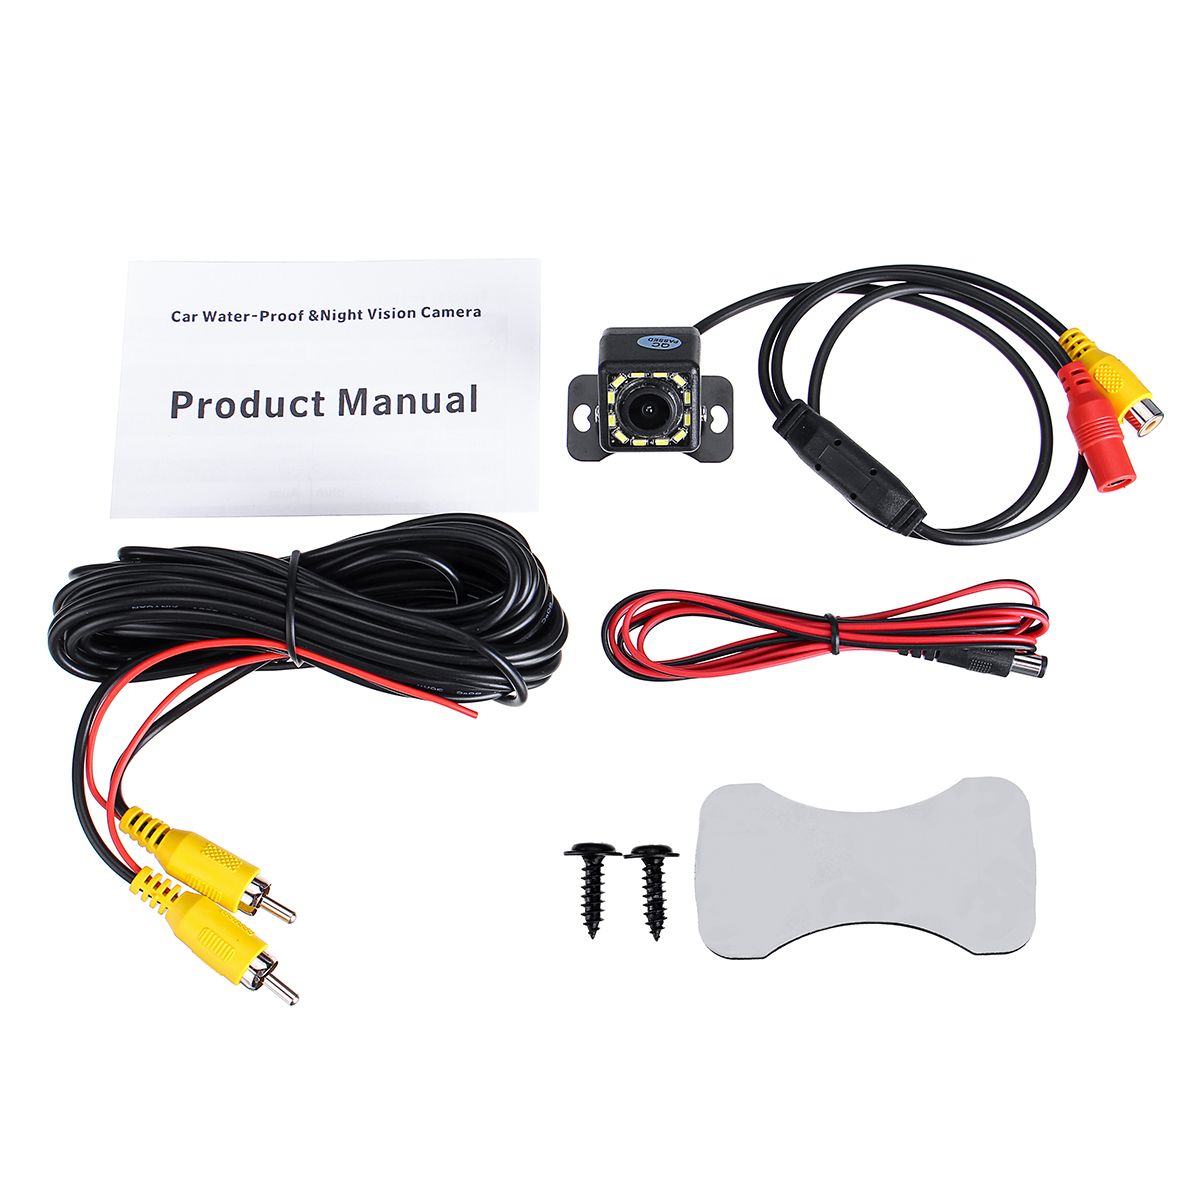 Waterproof-Front-and-Car-Rear-View-Visual-External-with-12-LED-lights-Camera-1543675